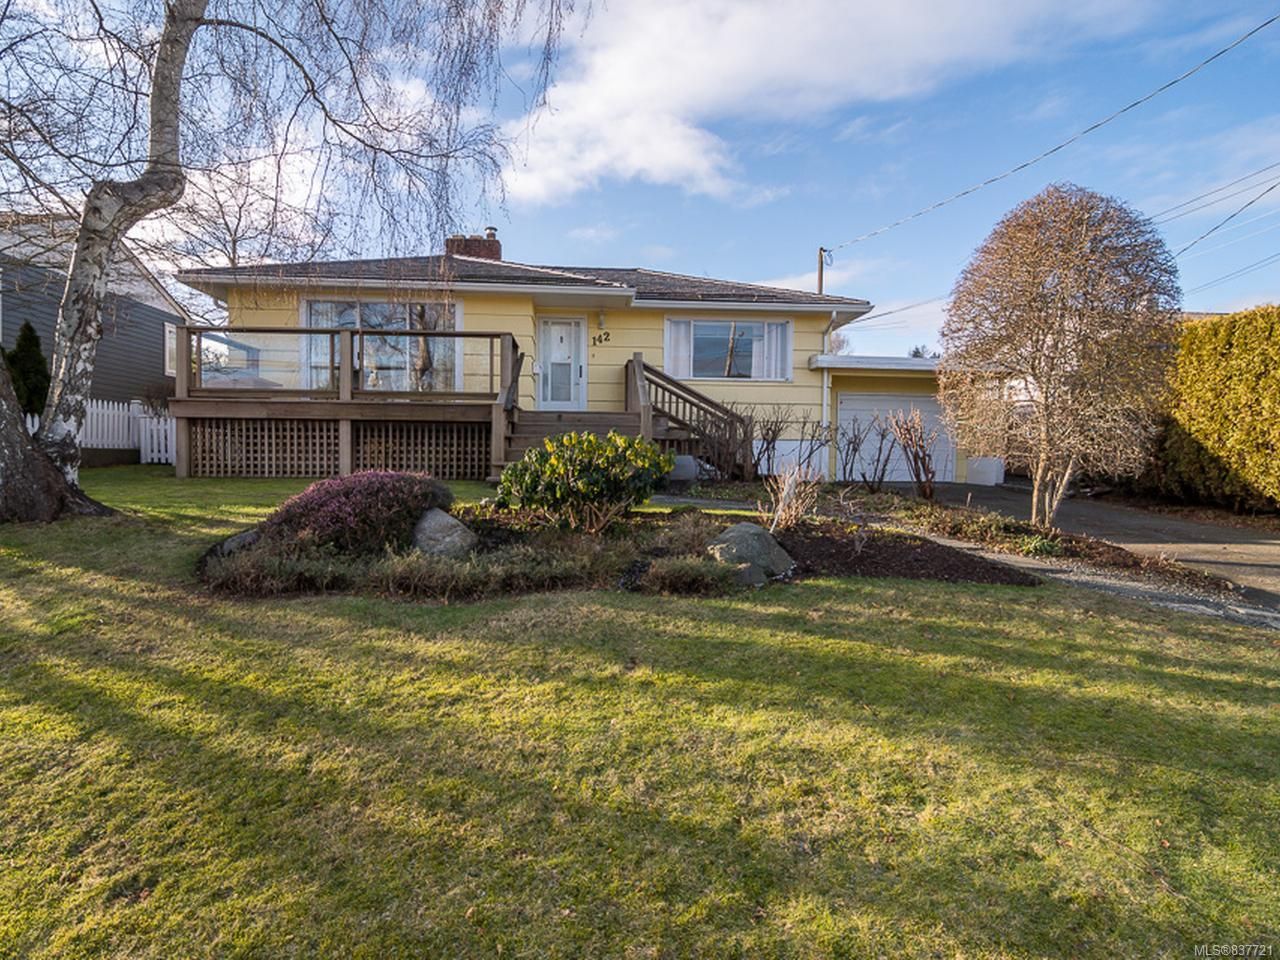 Main Photo: 142 THULIN STREET in CAMPBELL RIVER: CR Campbell River Central House for sale (Campbell River)  : MLS®# 837721